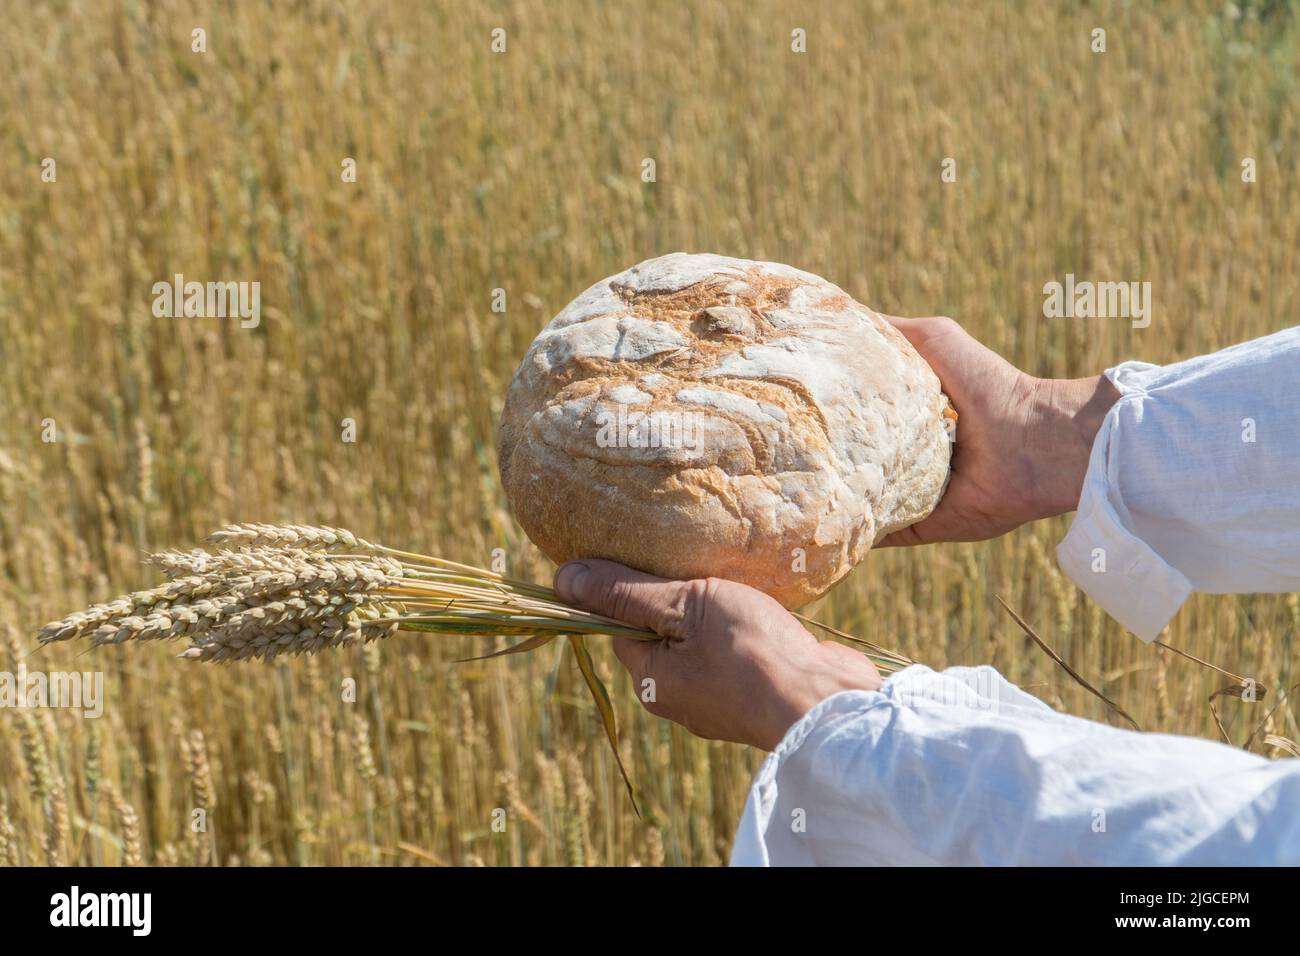 Male hands holding home baked bread loaf and ears of wheat above ripe wheat field. World food security concept. Stock Photo